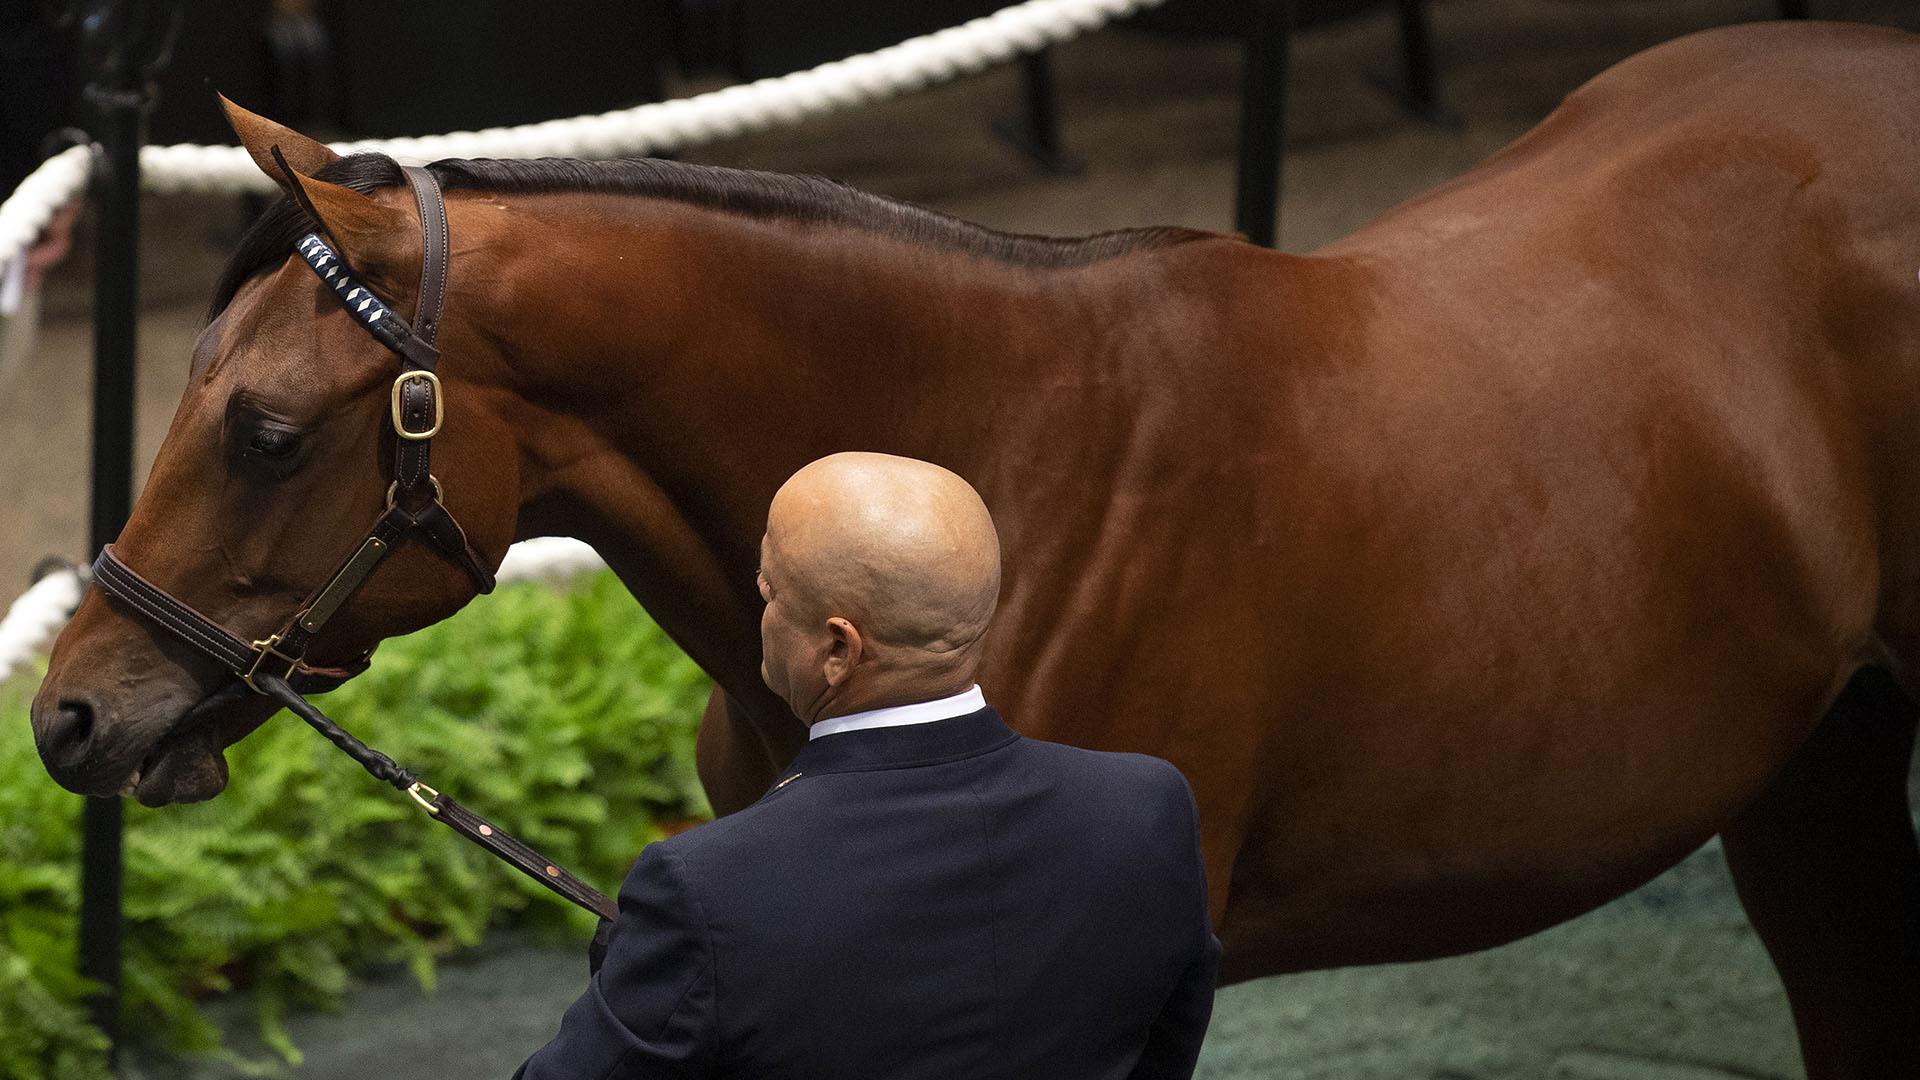 A colt by Street Sense out of the Honor Code made Pure Poison purchased at the 2023 Fasig-Tipton Saratoga Sale and available as the 2023 Madison, LLC thoroughbred racing partnership.